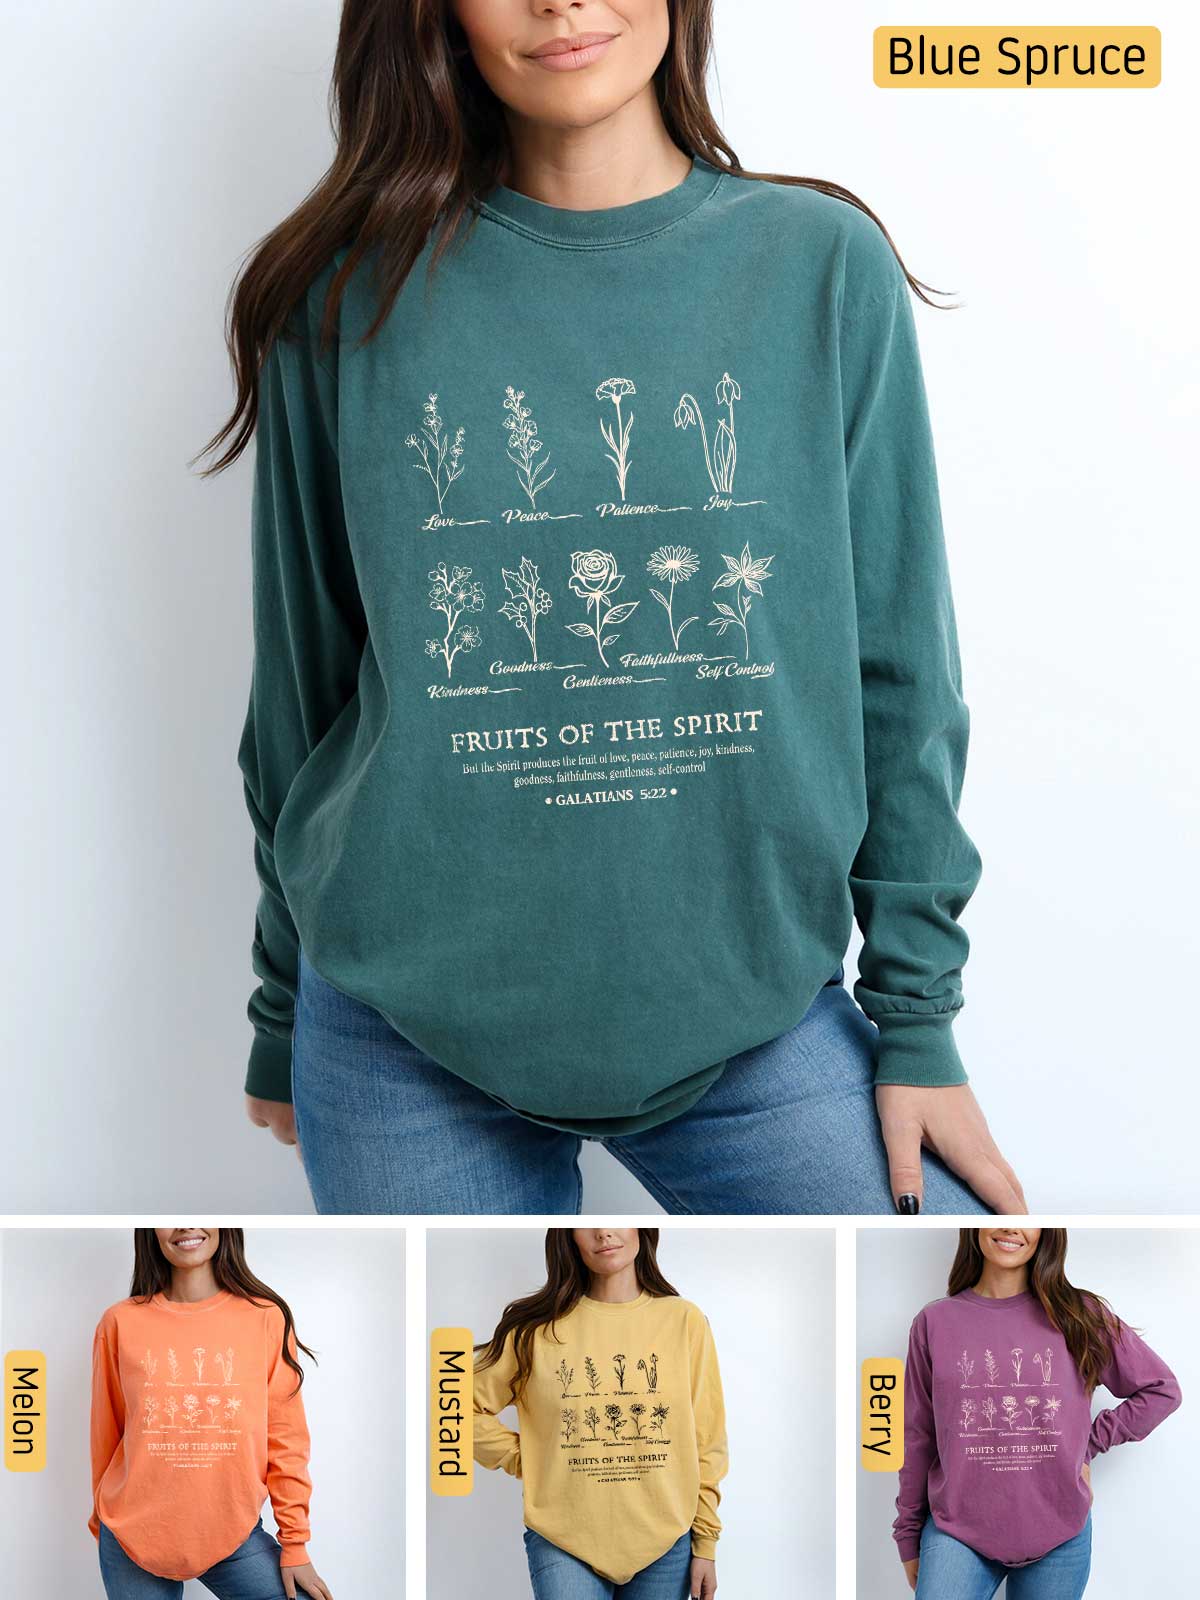 a woman wearing a sweatshirt with a plant graphic on it